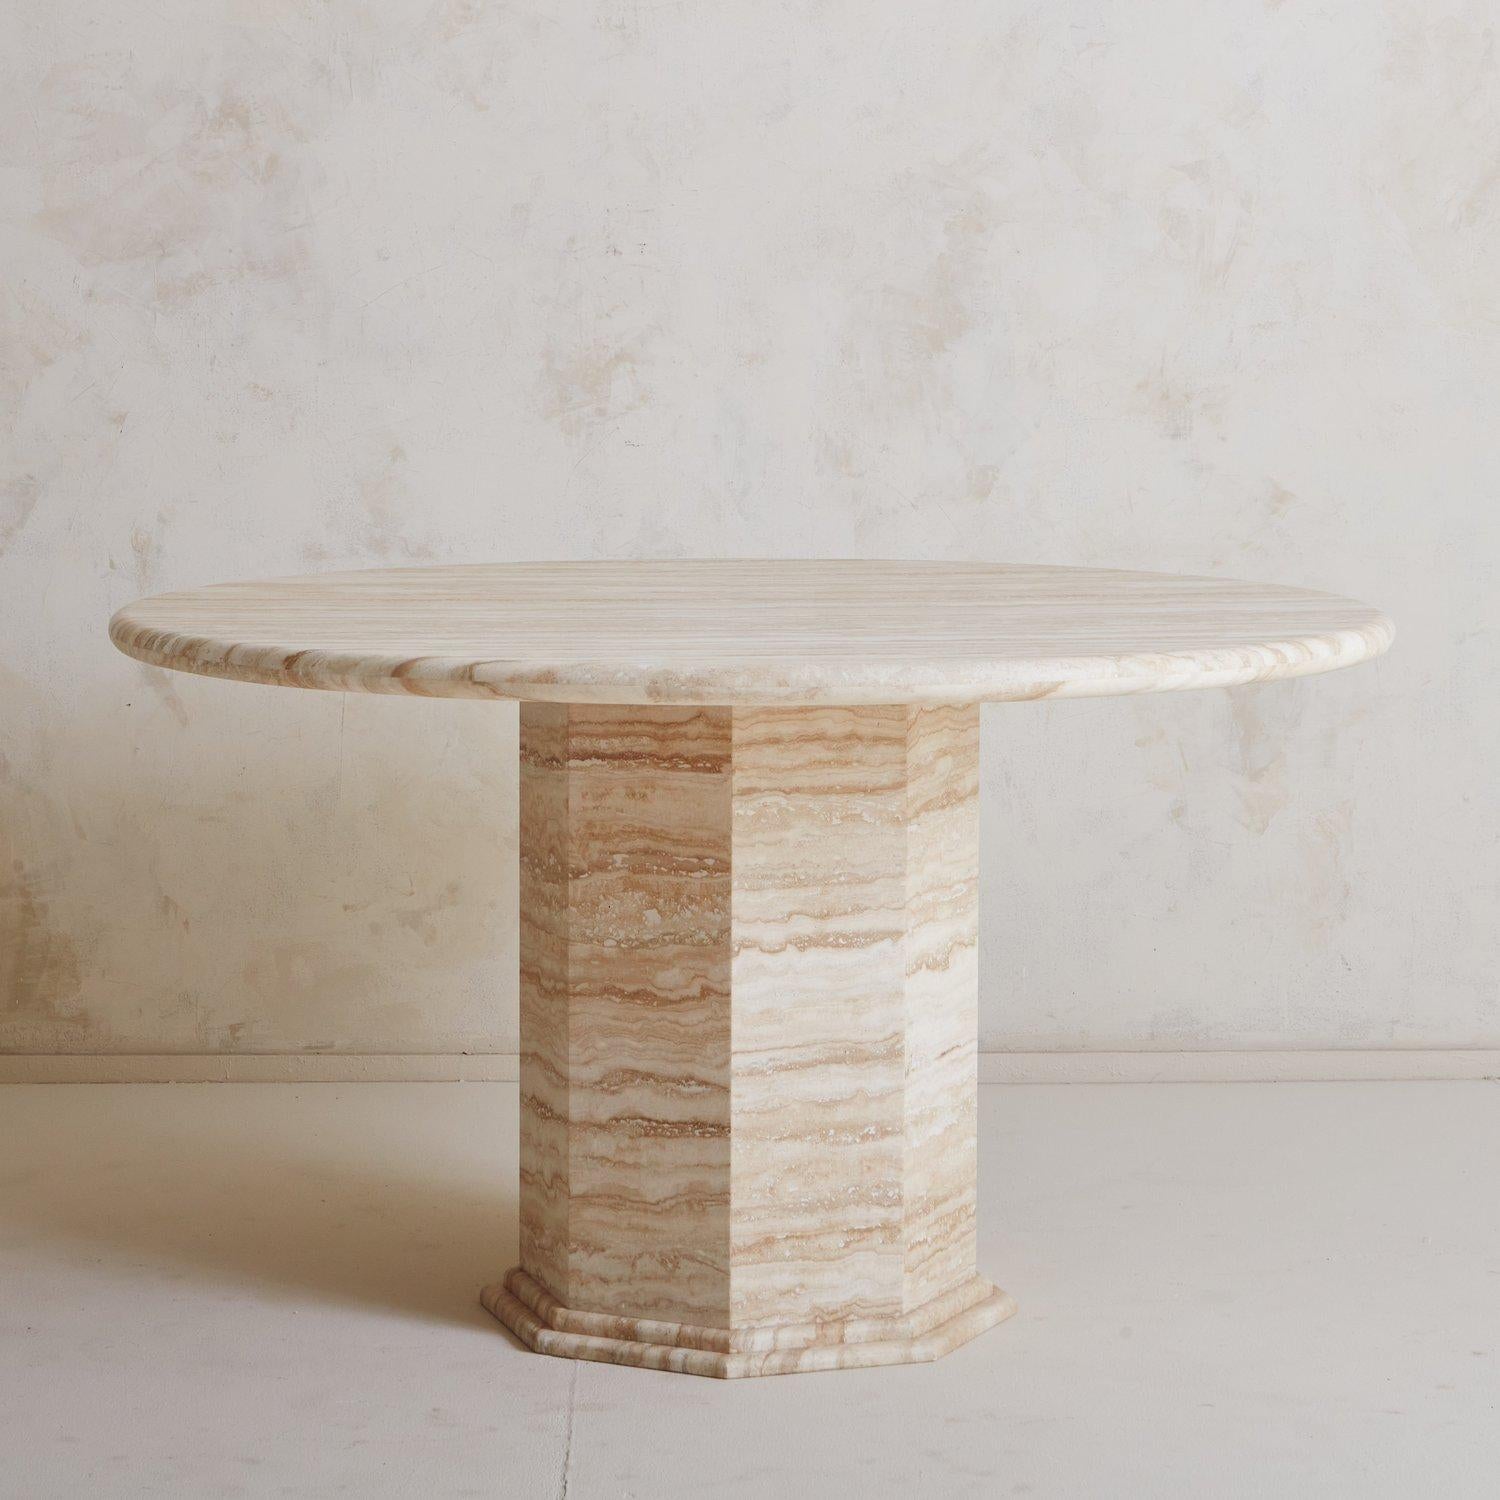 A stunning custom travertine dining table designed in house by South Loop Loft. This table features a round top resting on an octagonal mitered edge base with a double banded-edge detail.

This table is available on a Made to Order Basis. It is